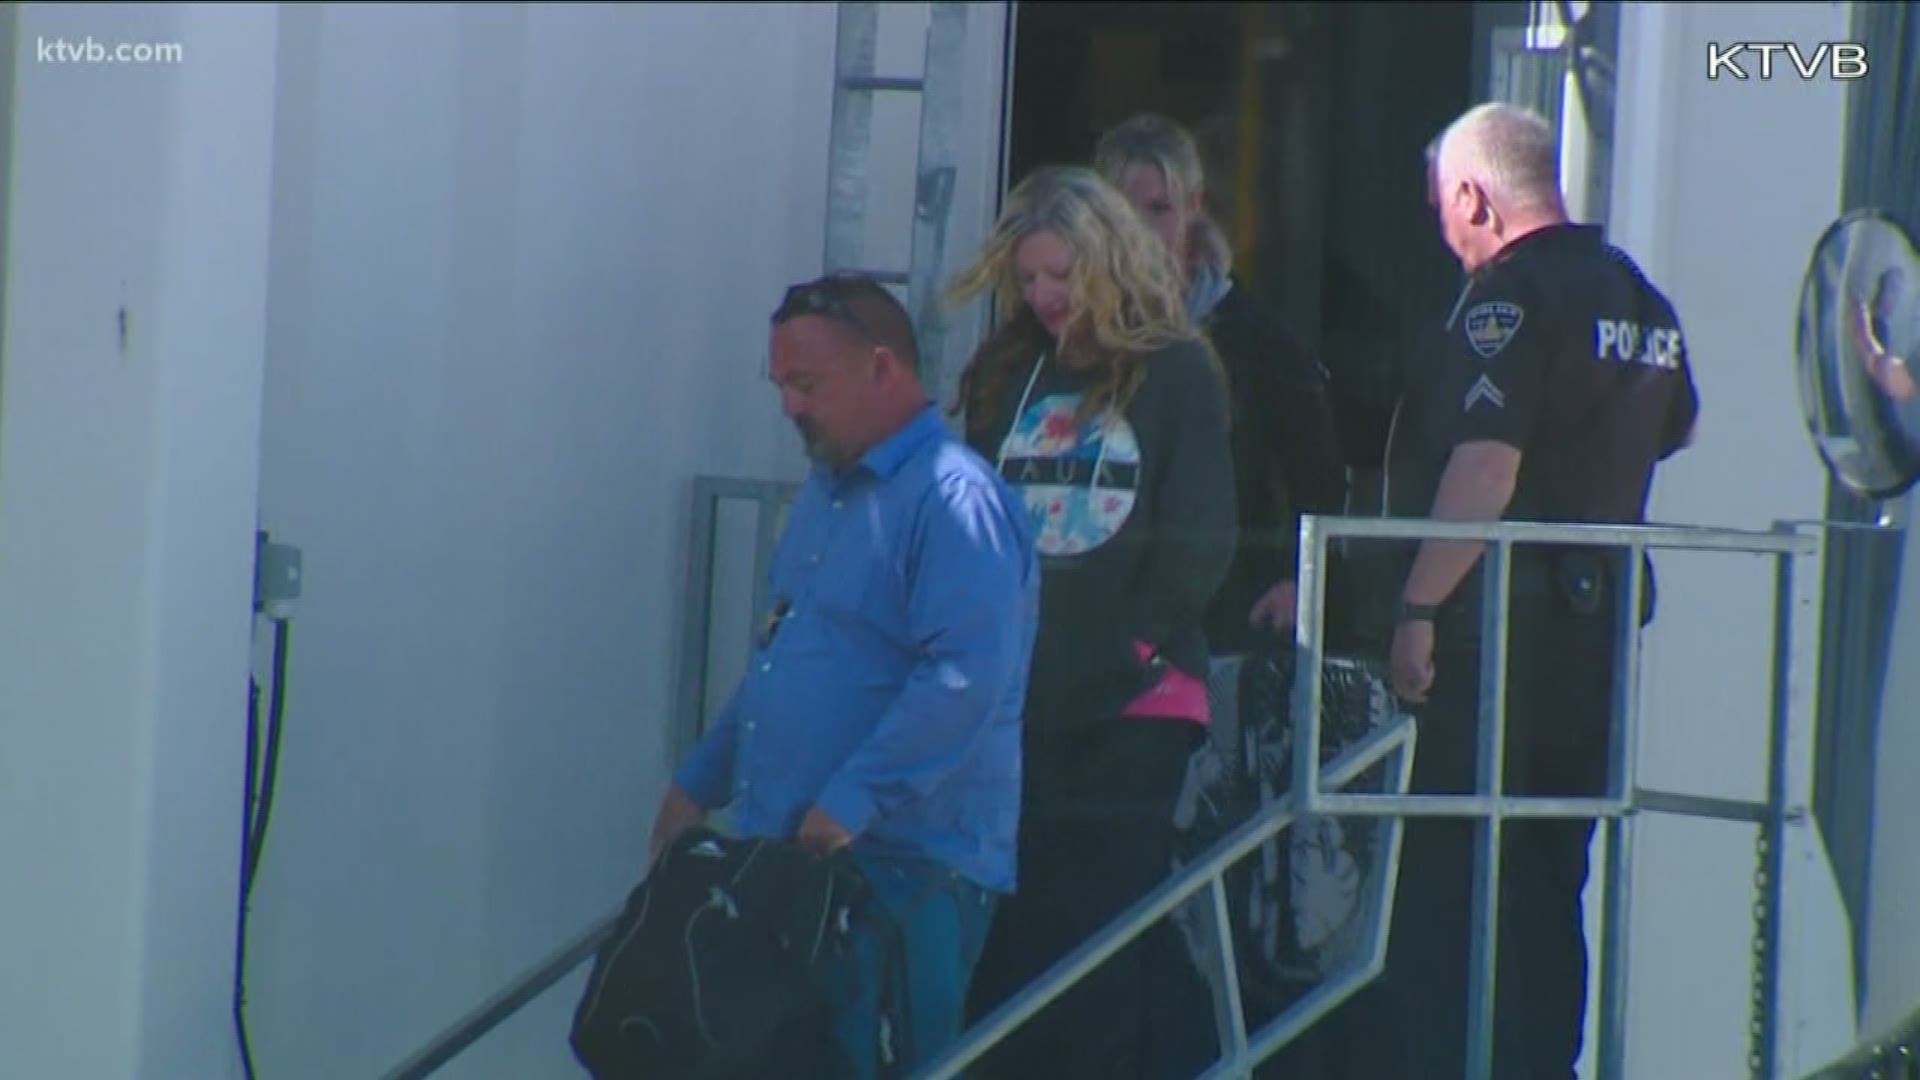 Lori Vallow, the mother of two missing Idaho kids, has arrived Rexburg. She arrived there by plane Thursday afternoon. Our Misty Inglet is in Rexburg.